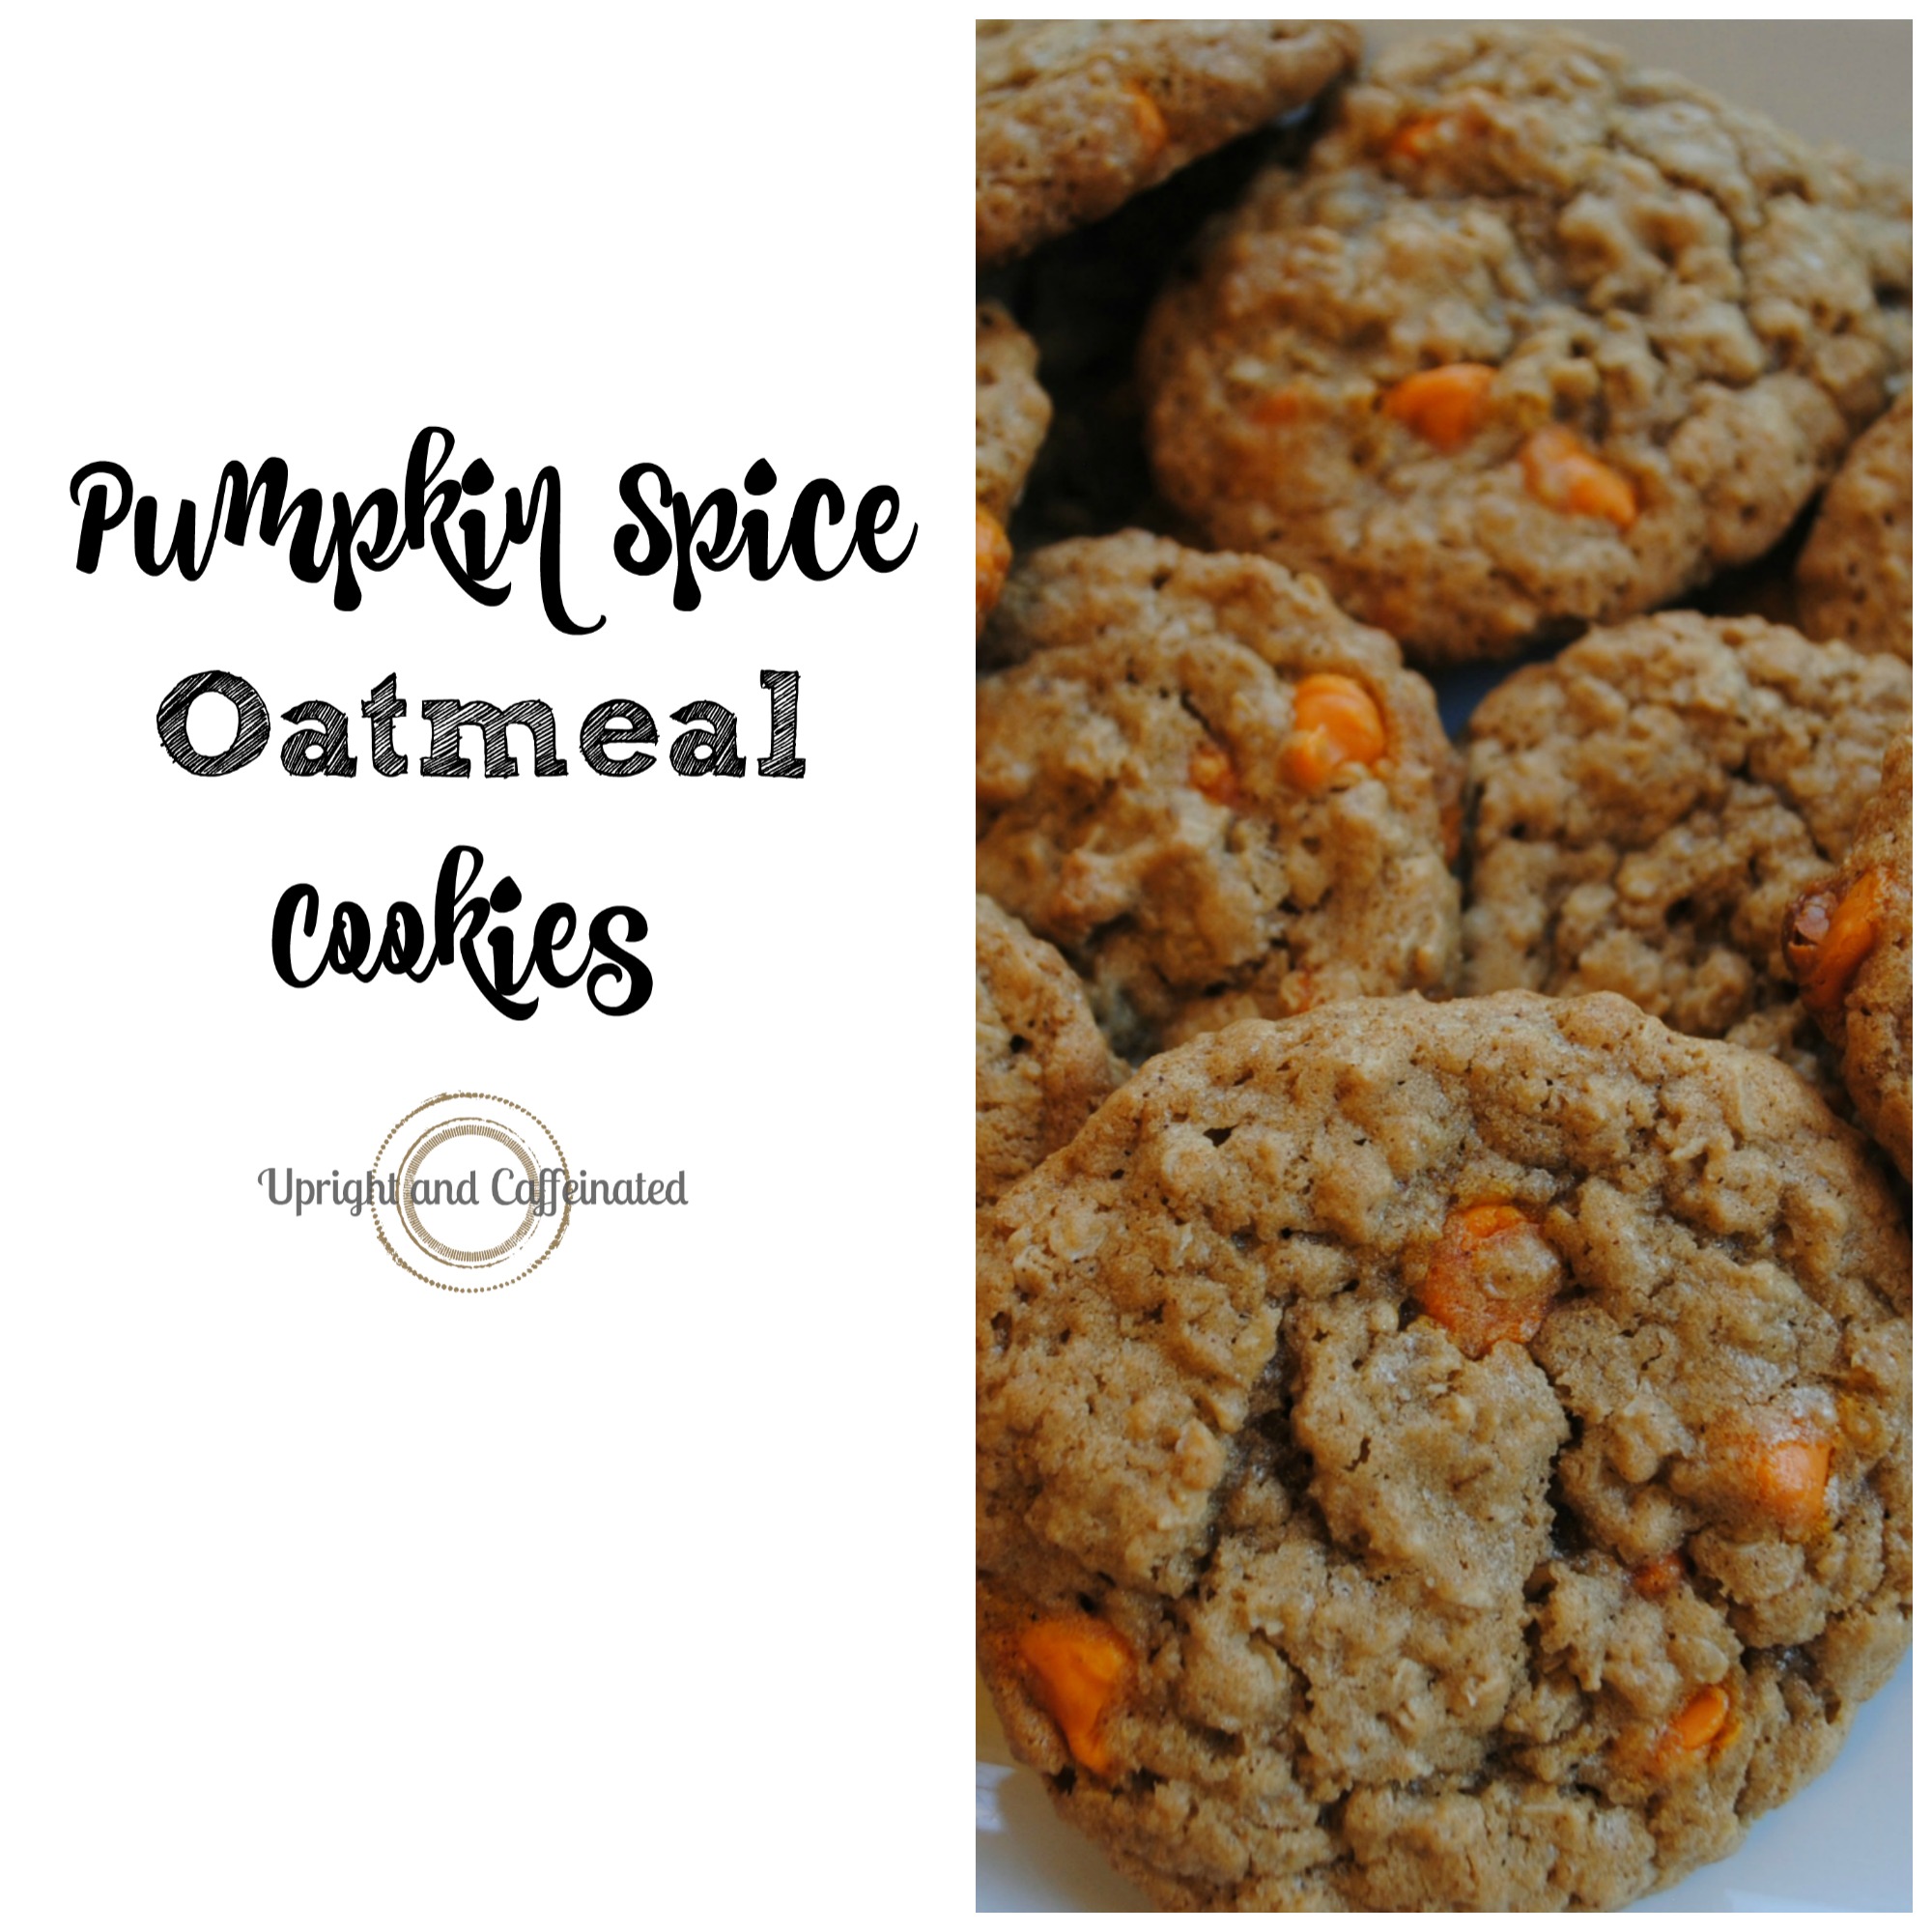 This Pumpkin Spice Oatmeal Cookies recipe is the BEST cookie recipe you will try this Fall!